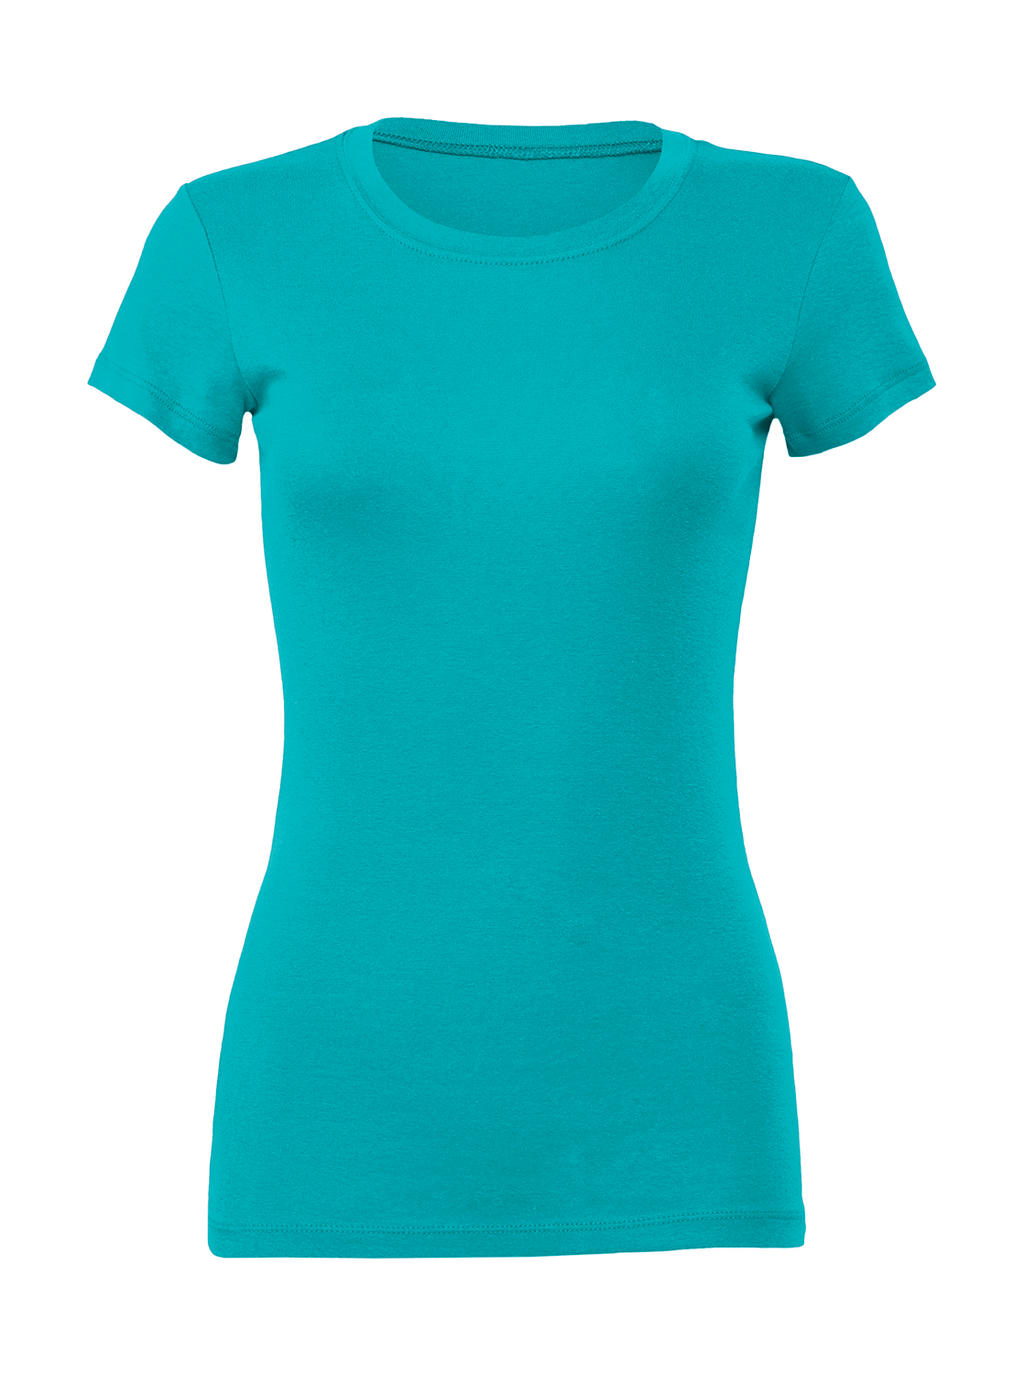  The Favorite T-Shirt in Farbe Teal